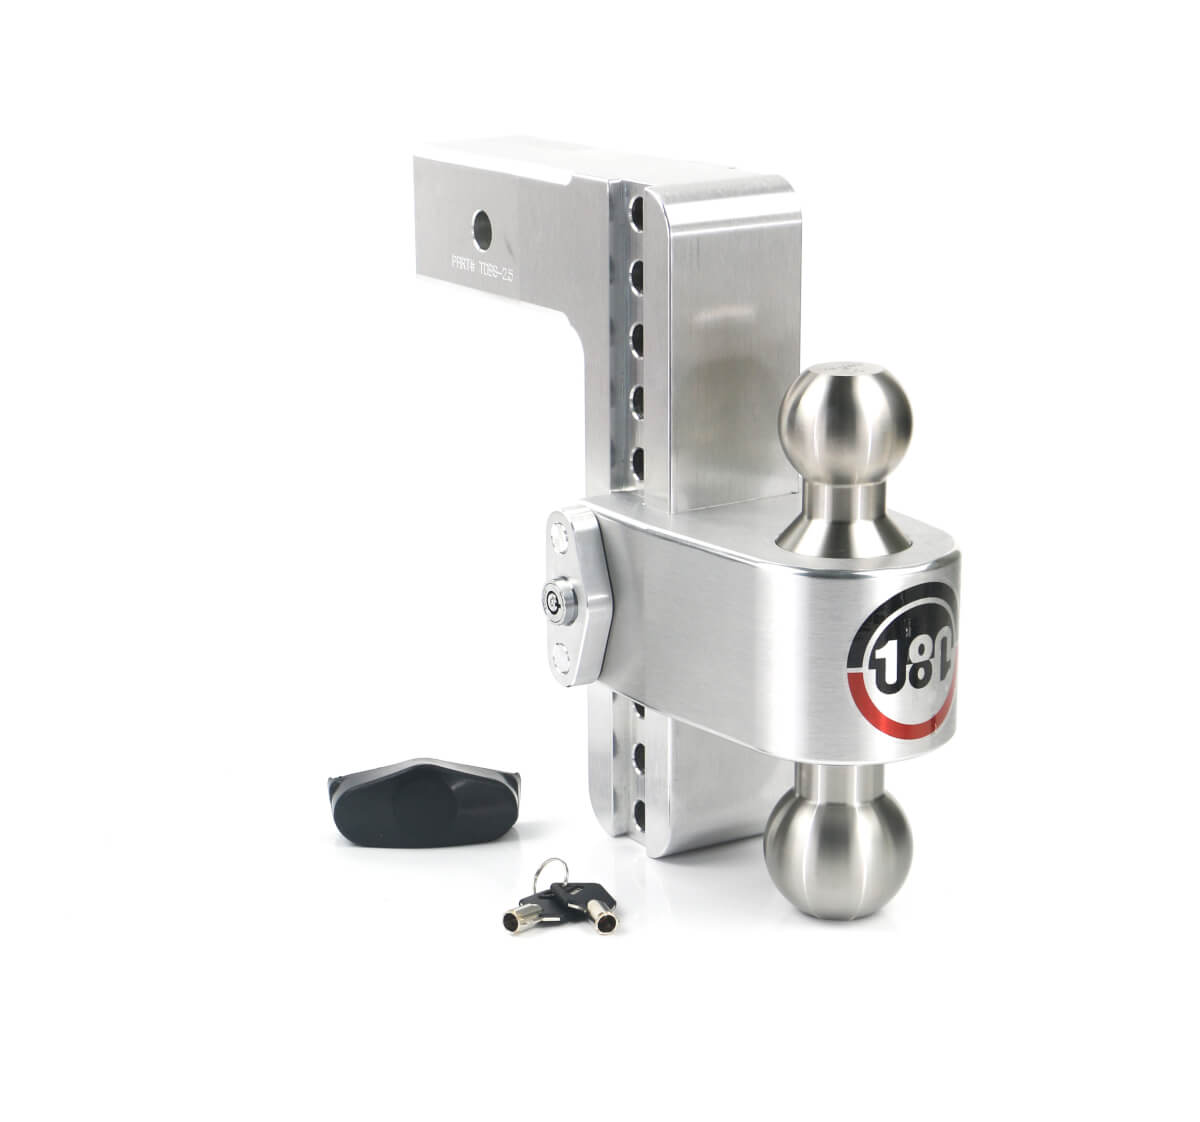 Weigh Safe CTB8-2 2 & 2-5/16 Chrome Plated Steel Combo Ball and a Double-pin Key Lock 8 Drop 180 Hitch w/ 2 Shank/Shaft Adjustable Aluminum Trailer Hitch & Ball Mount 